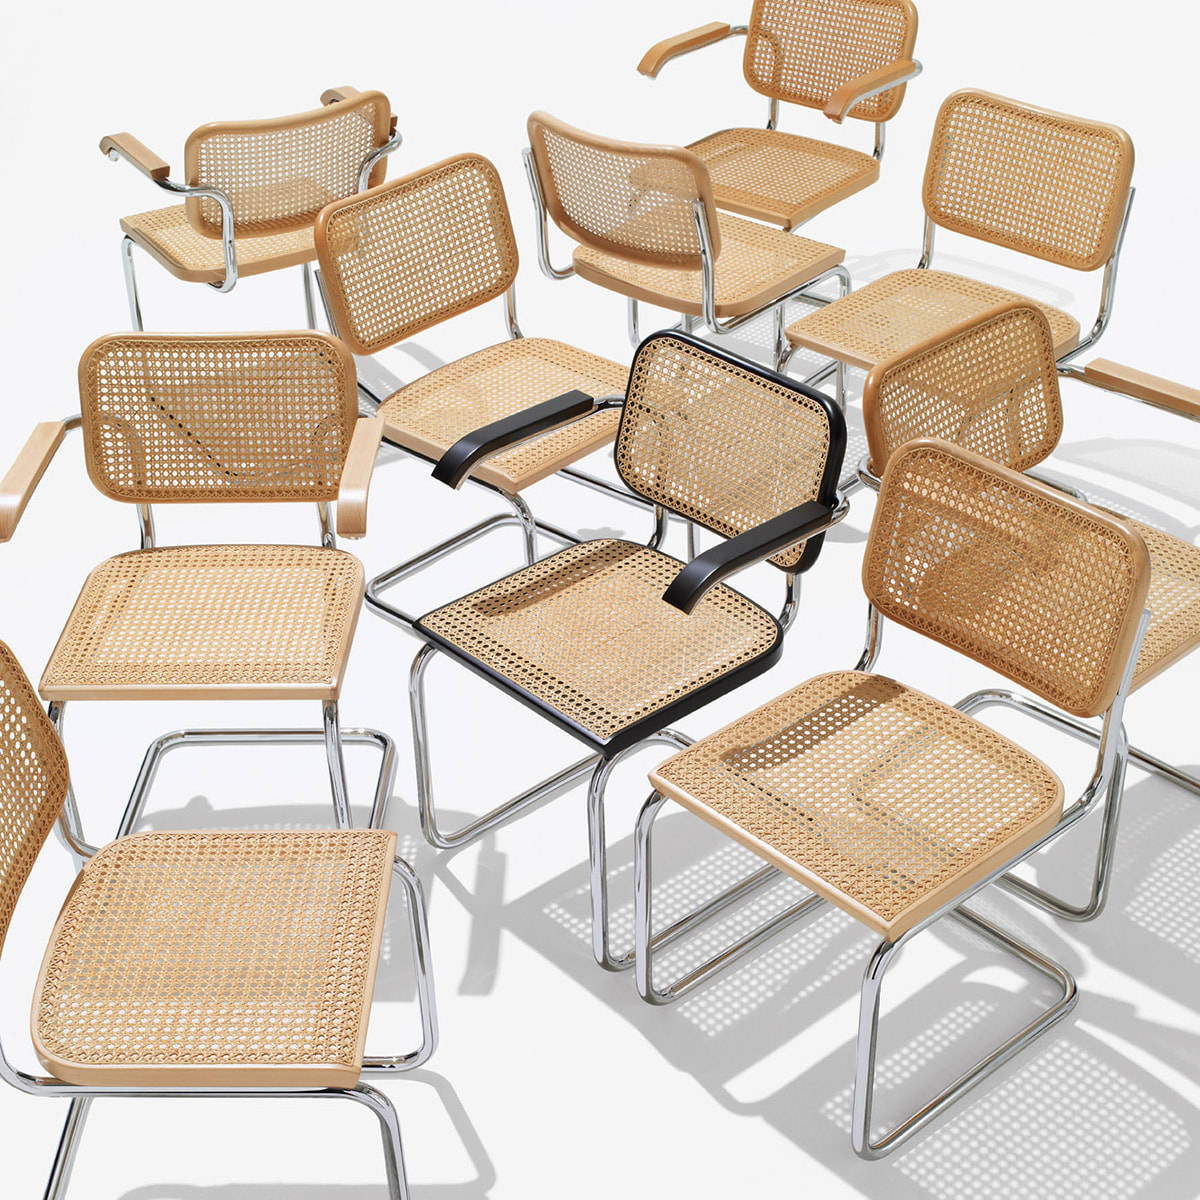 Bauhaus Masterpiece: Exclusive Discounts on Cesca Chairs for Multiple Purchases!